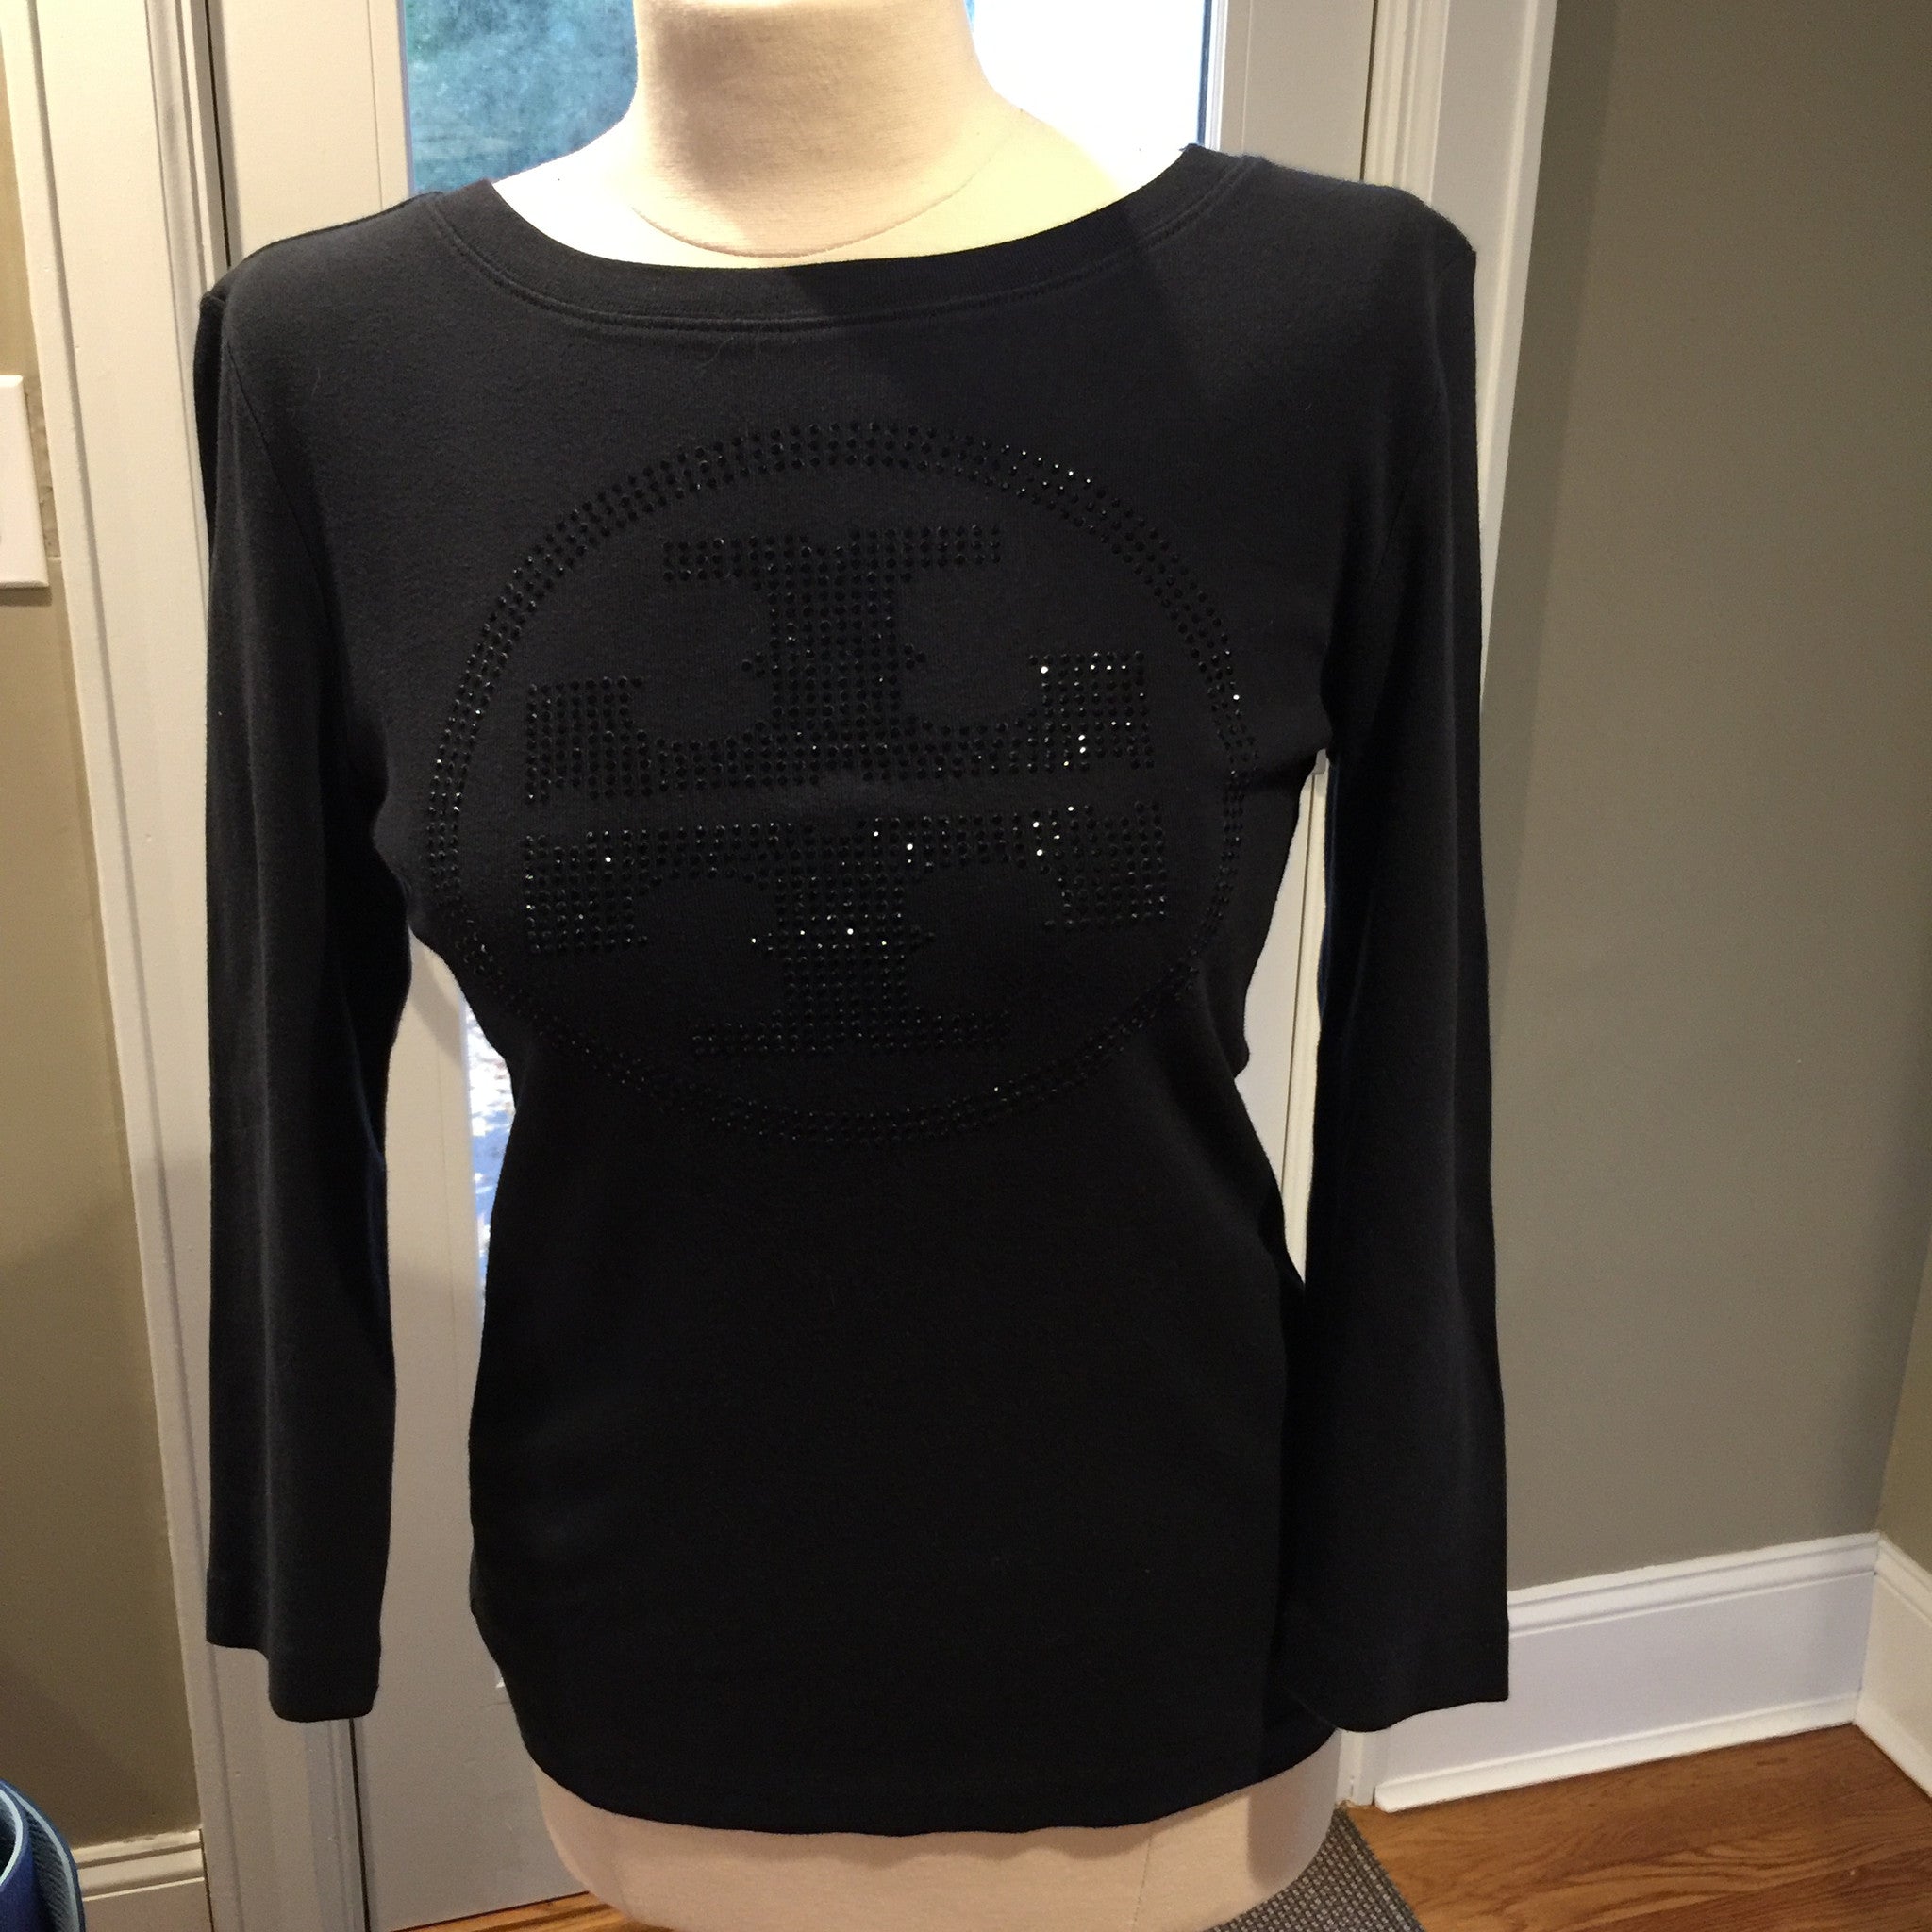 Tory Burch Black Cotton Long Sleeved Top - New Neu Glamour | Preloved  Designer Jewelry, Shoes & Handbags.